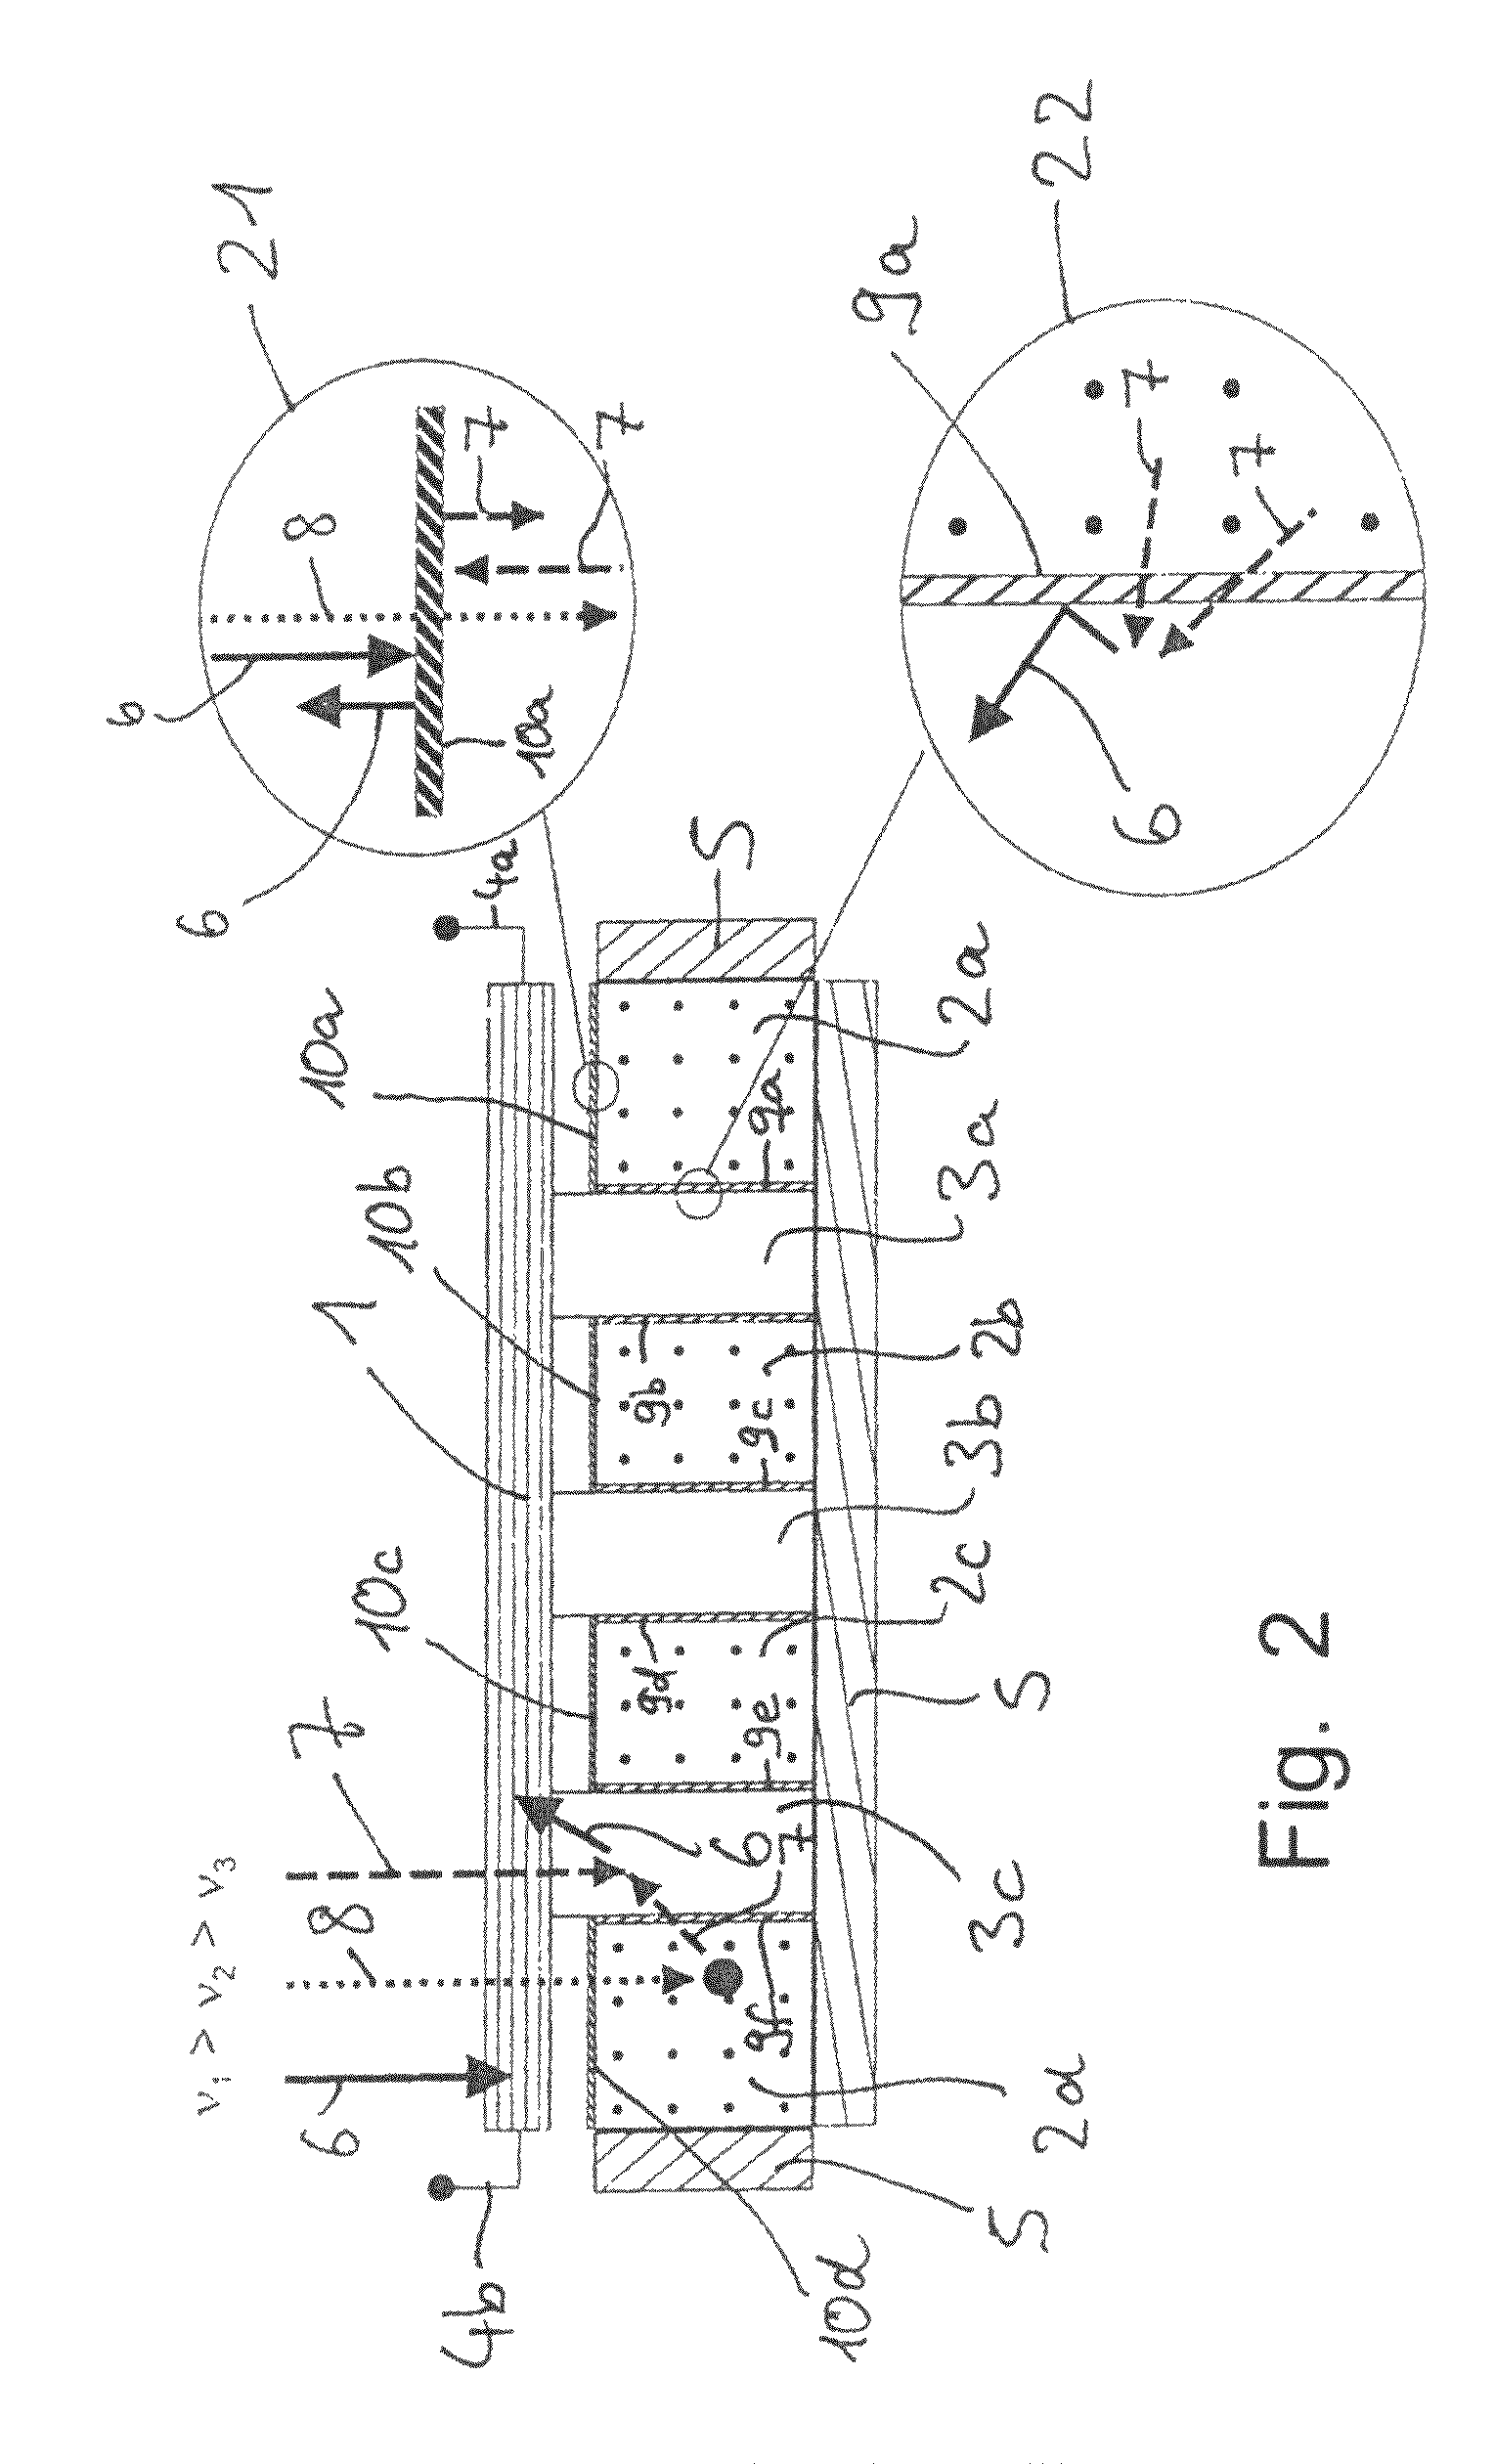 Solar element with increased efficiency and method for increasing efficiency